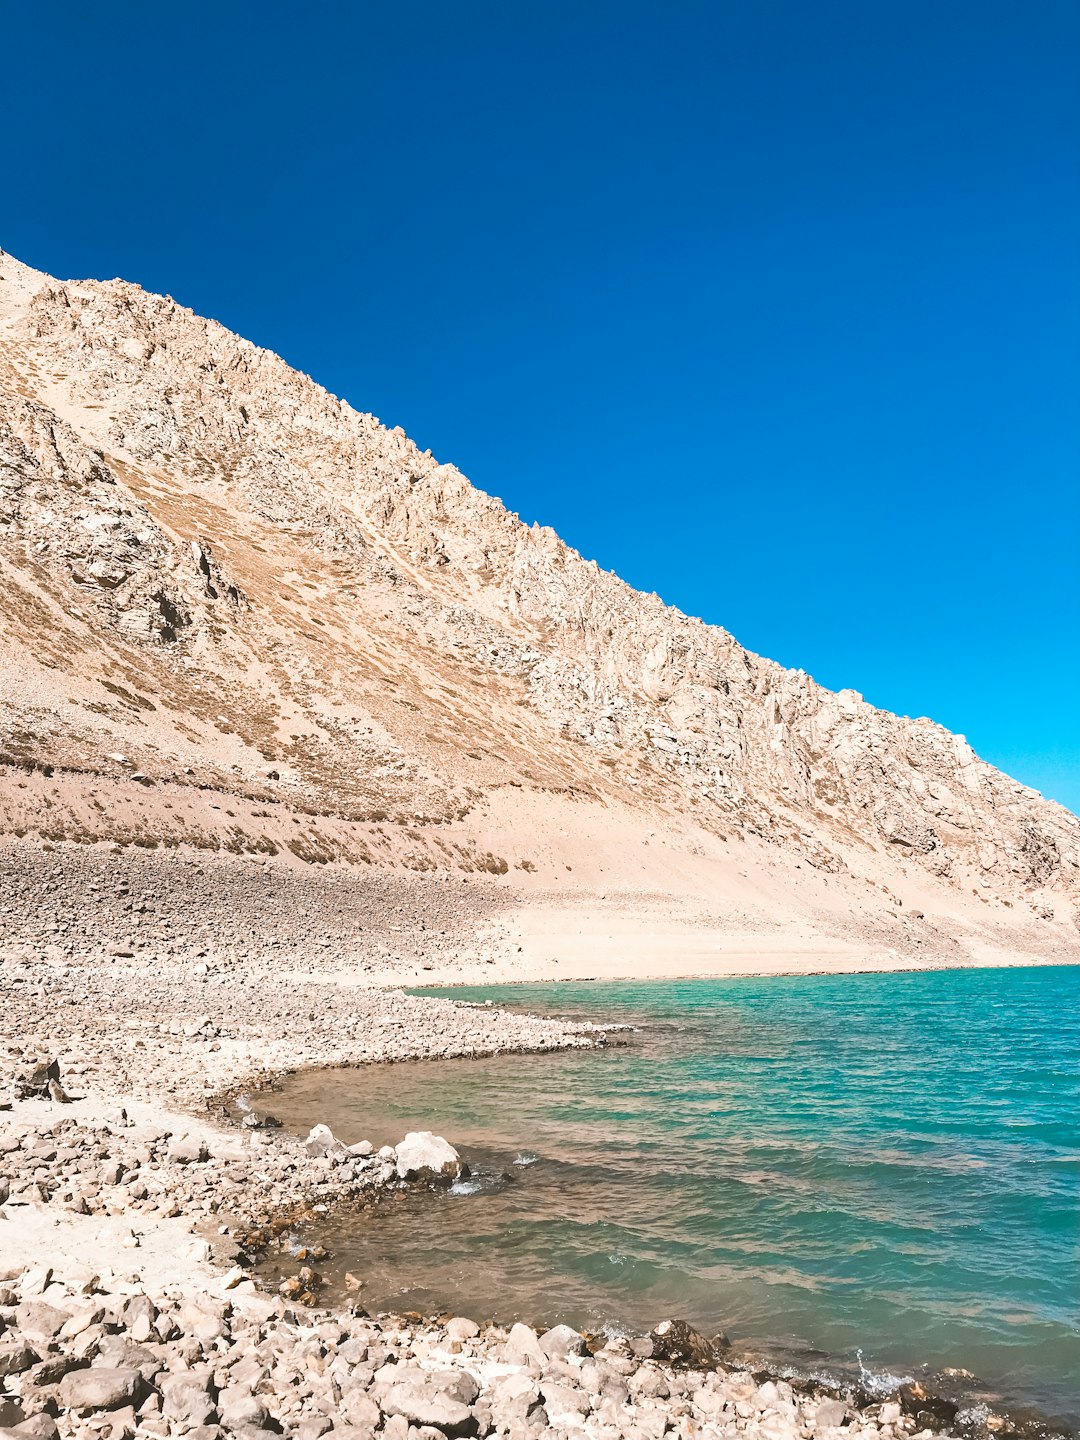 travelers stories about Shore in Embalse el Yeso, Chile